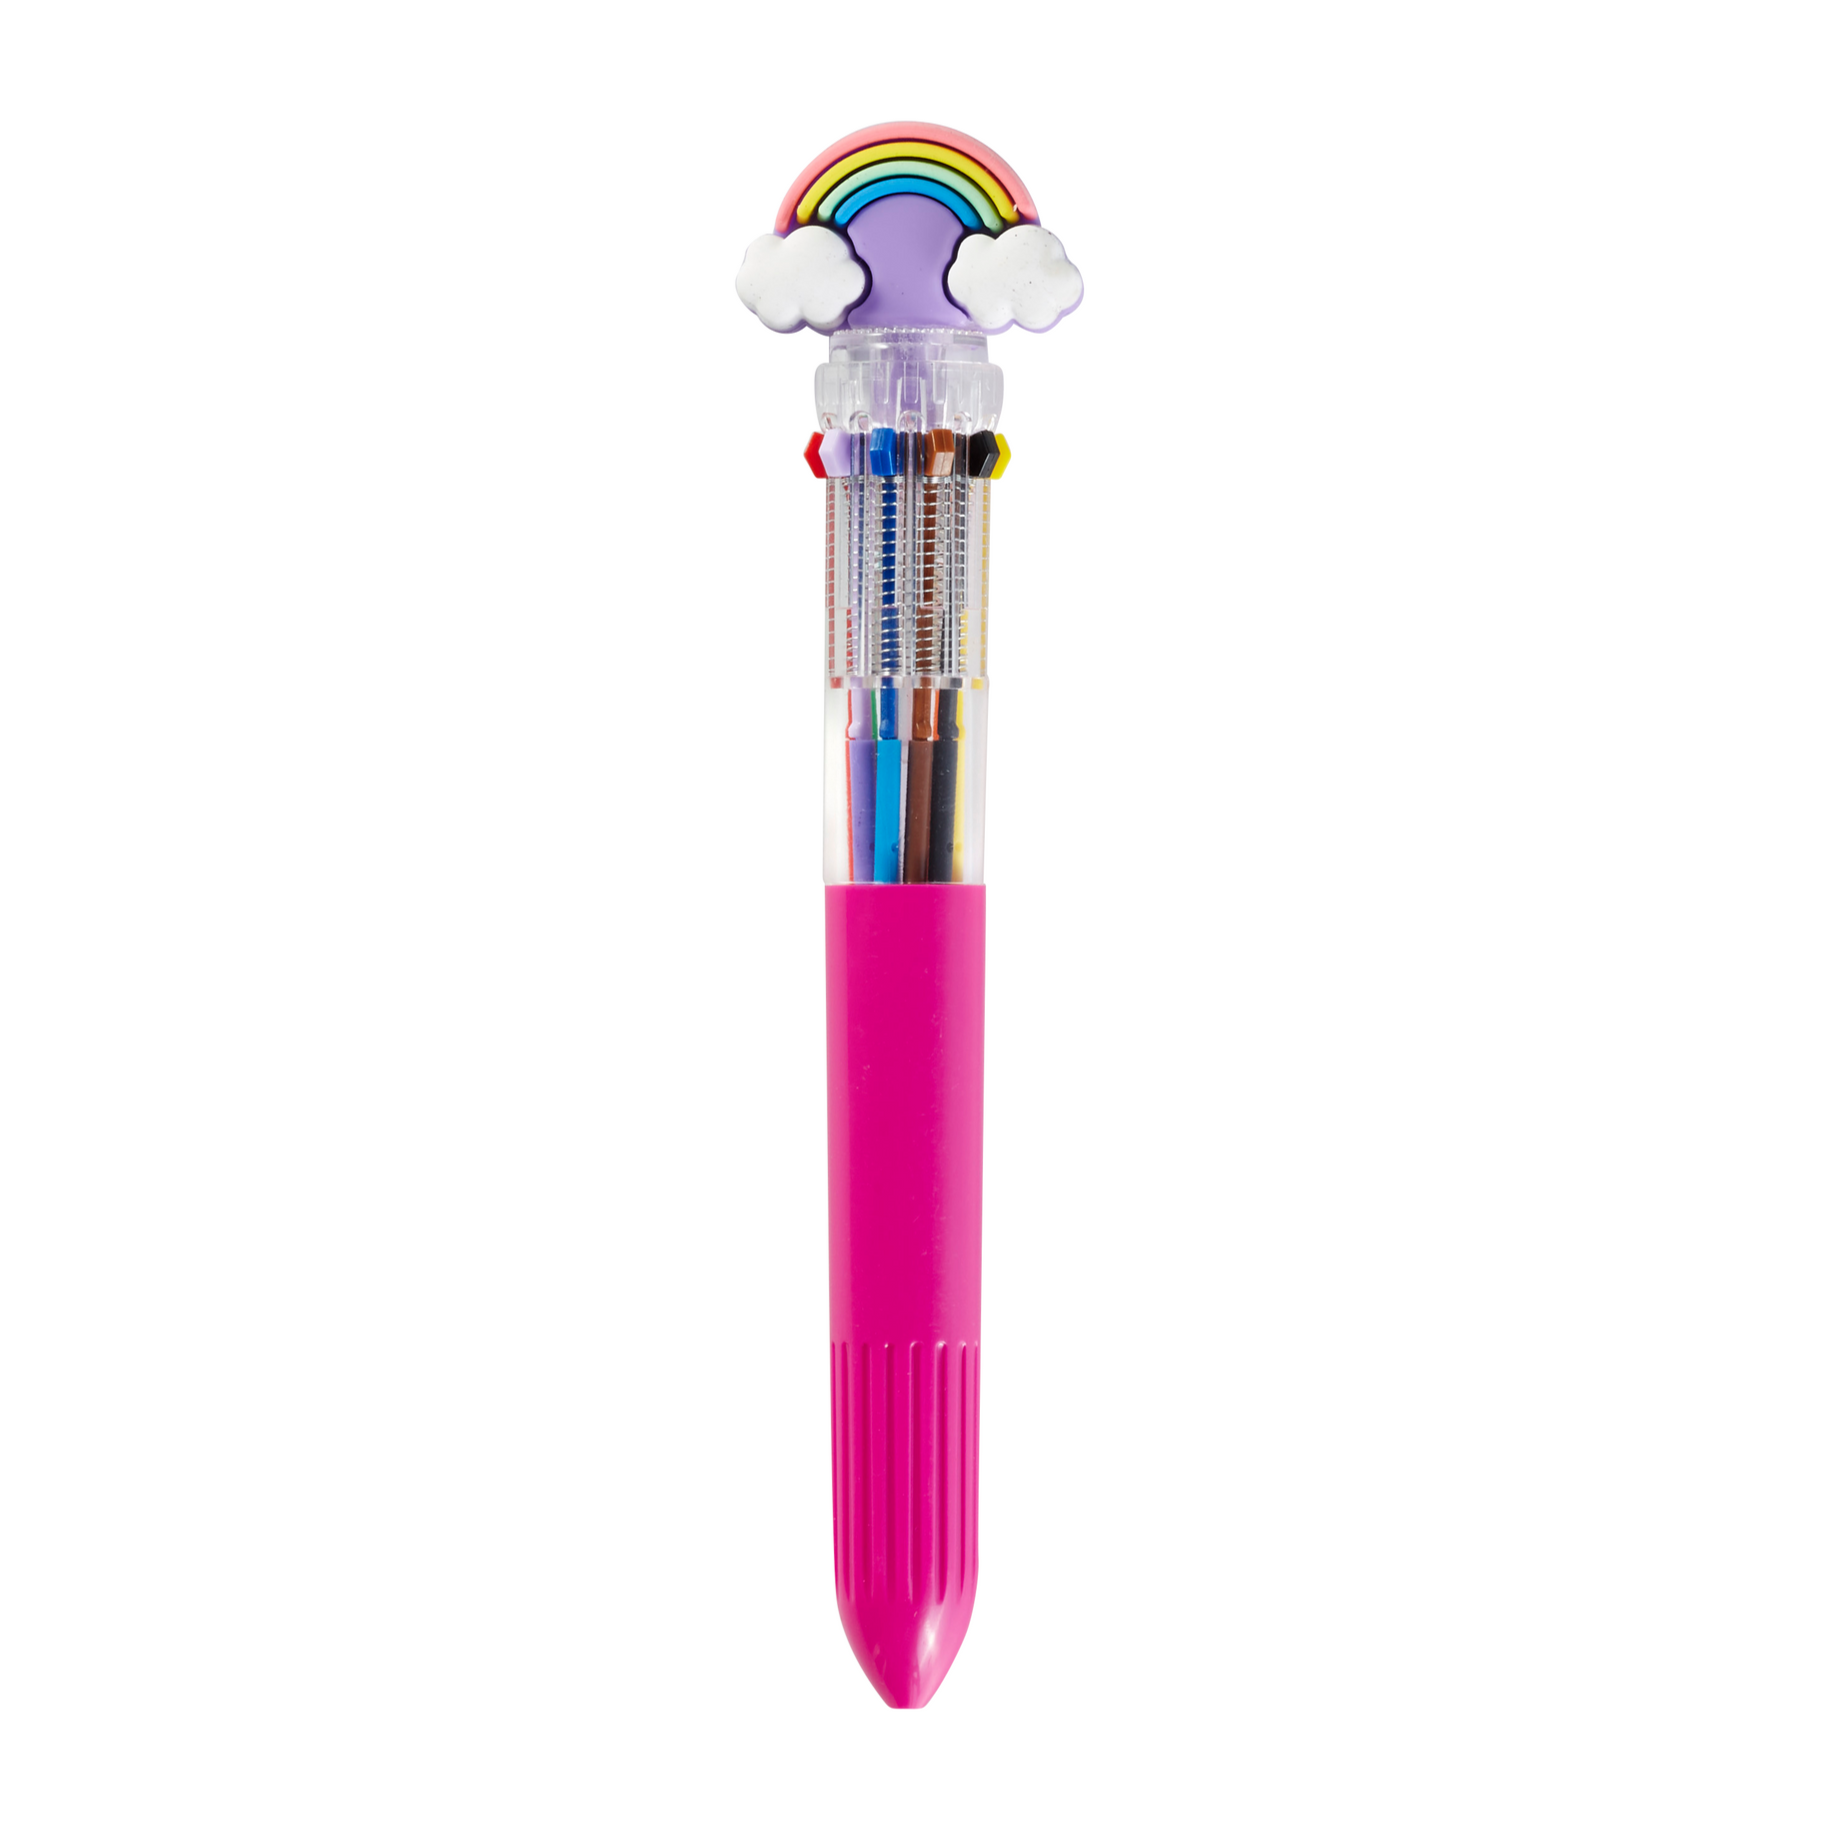 10 Color Pen with Topper - Rainbow - HoneyBug 